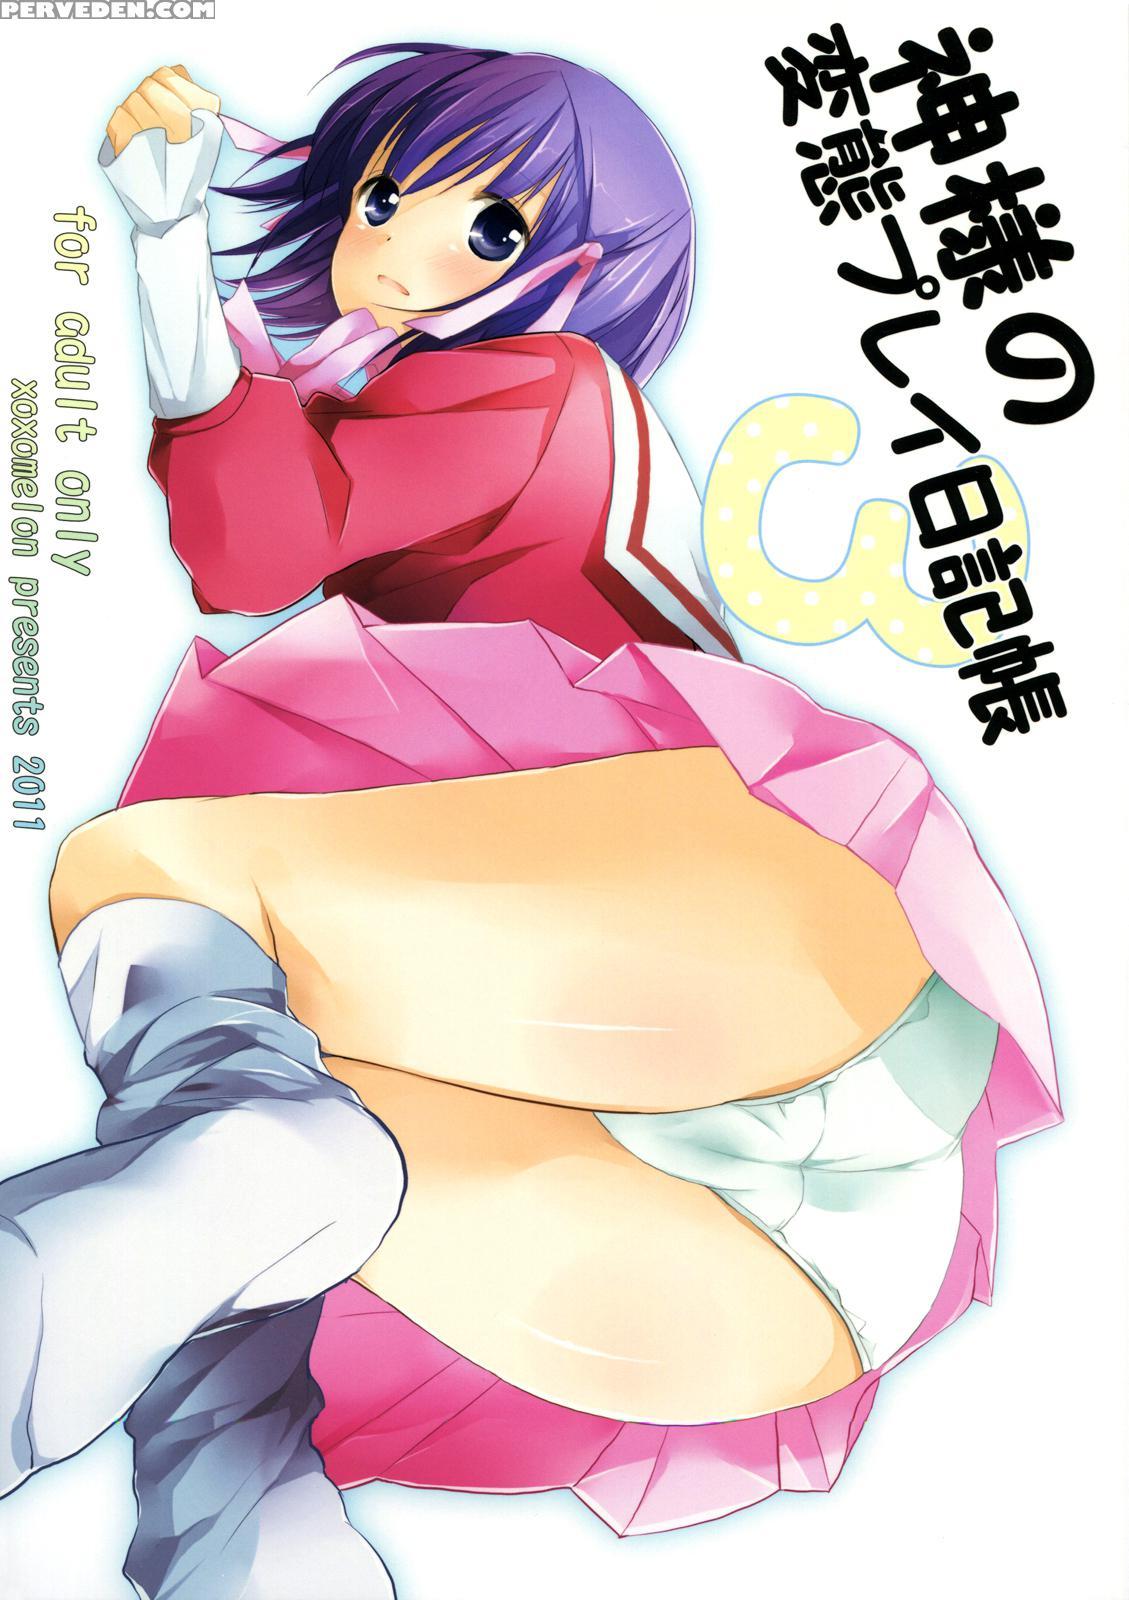 Kamisama's Hentai Play Diary 3 - The World God Only Knows 1